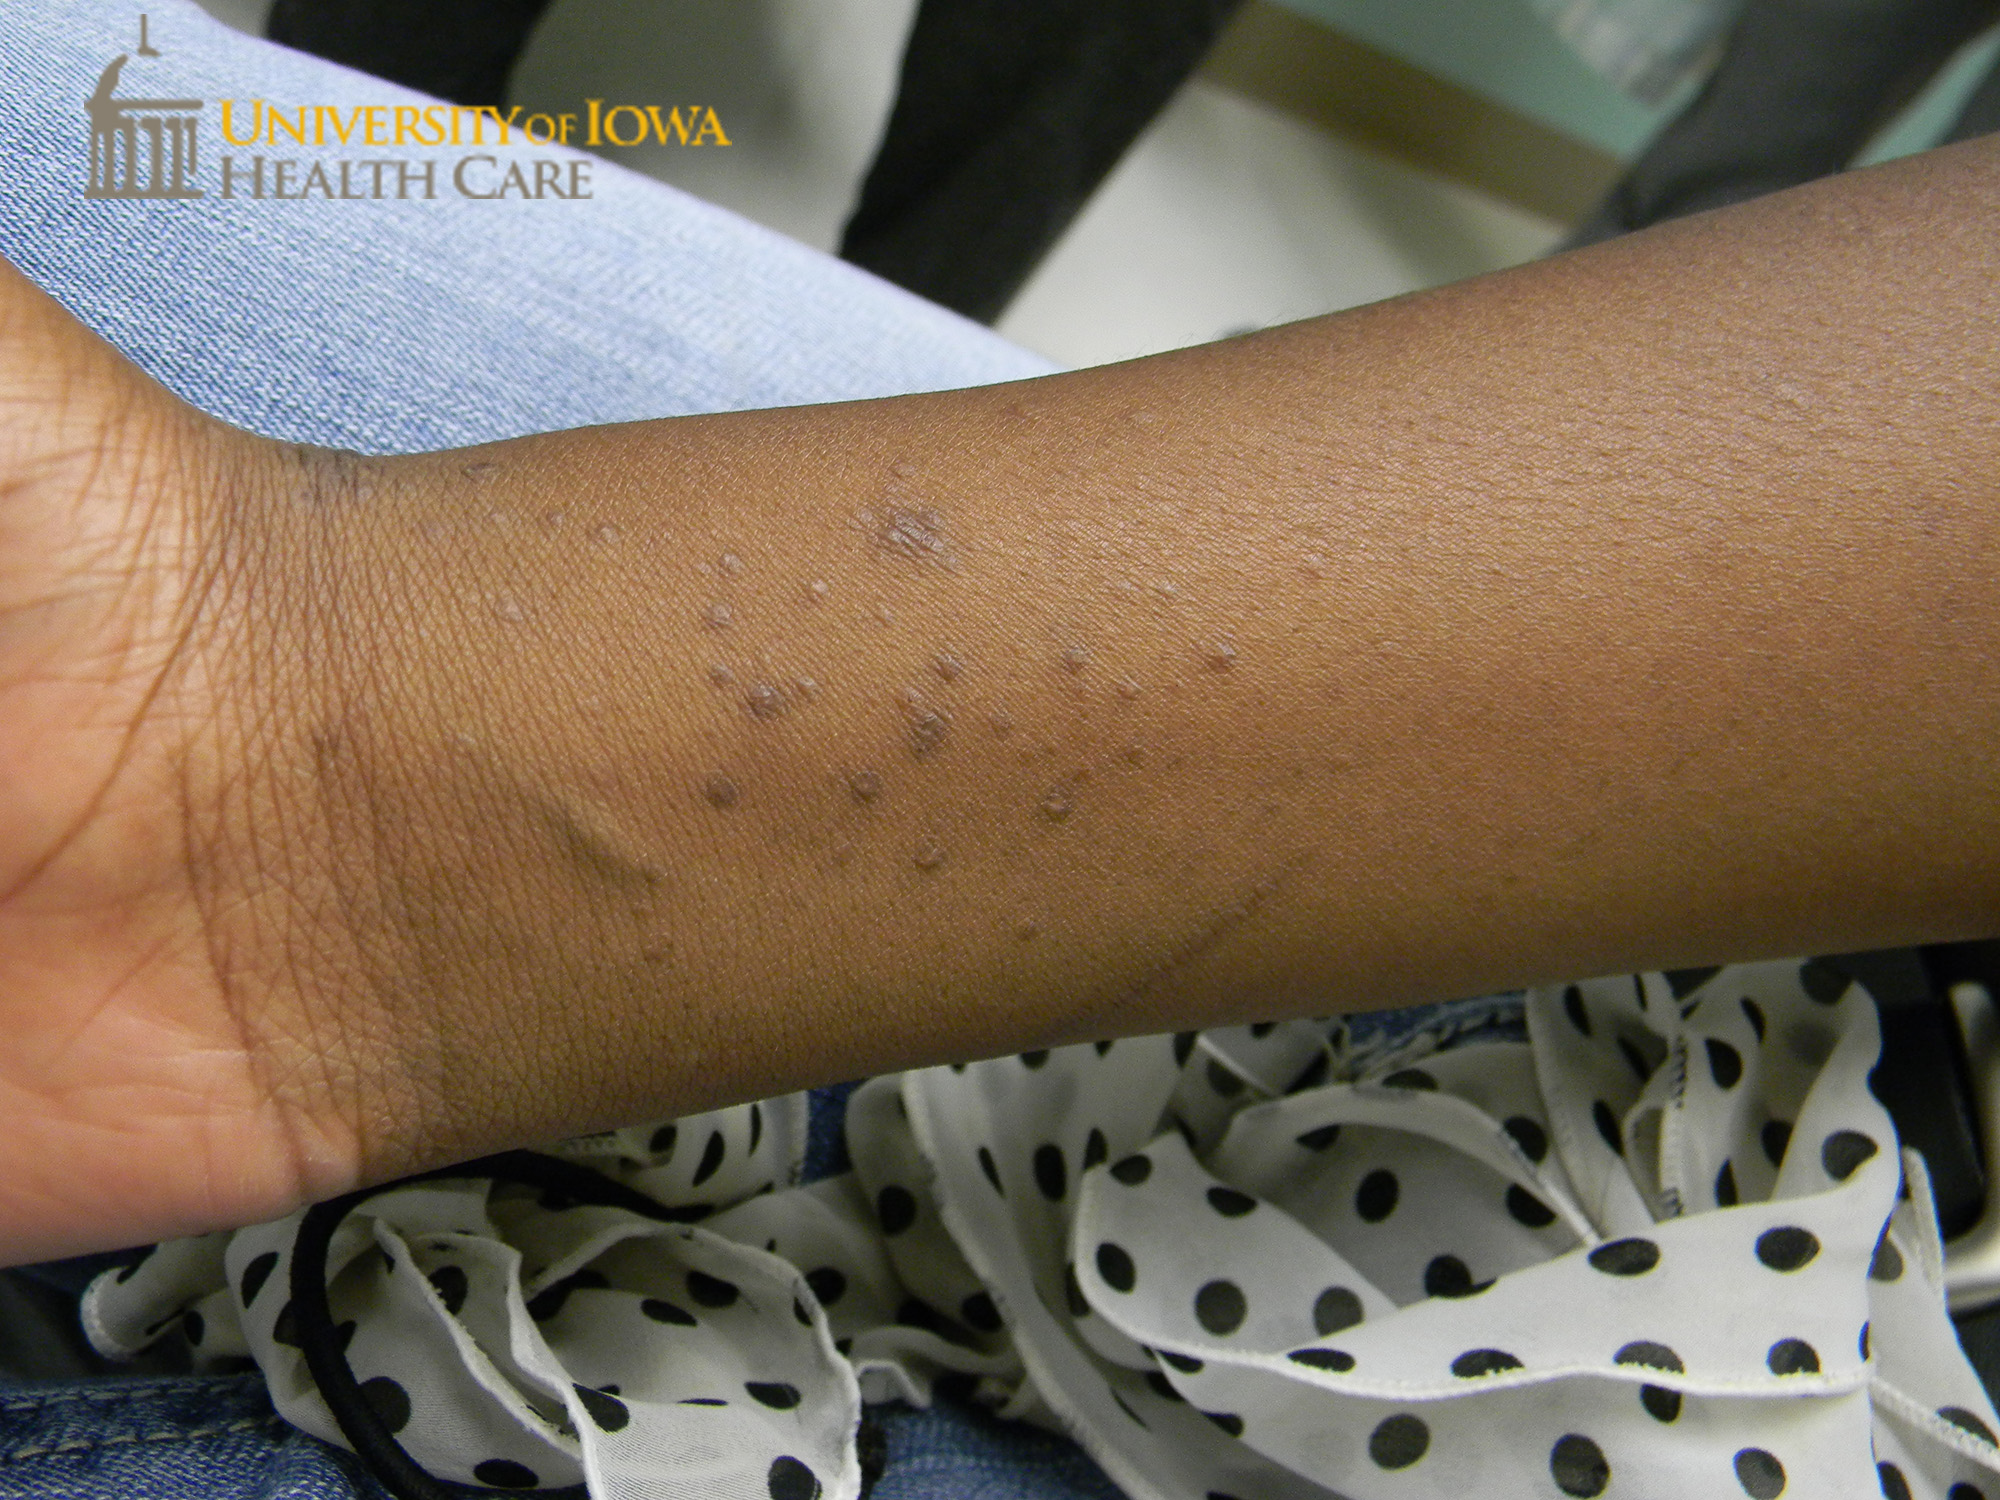 Hyperpigmented monomorphic papules on the arms. (click images for higher resolution).